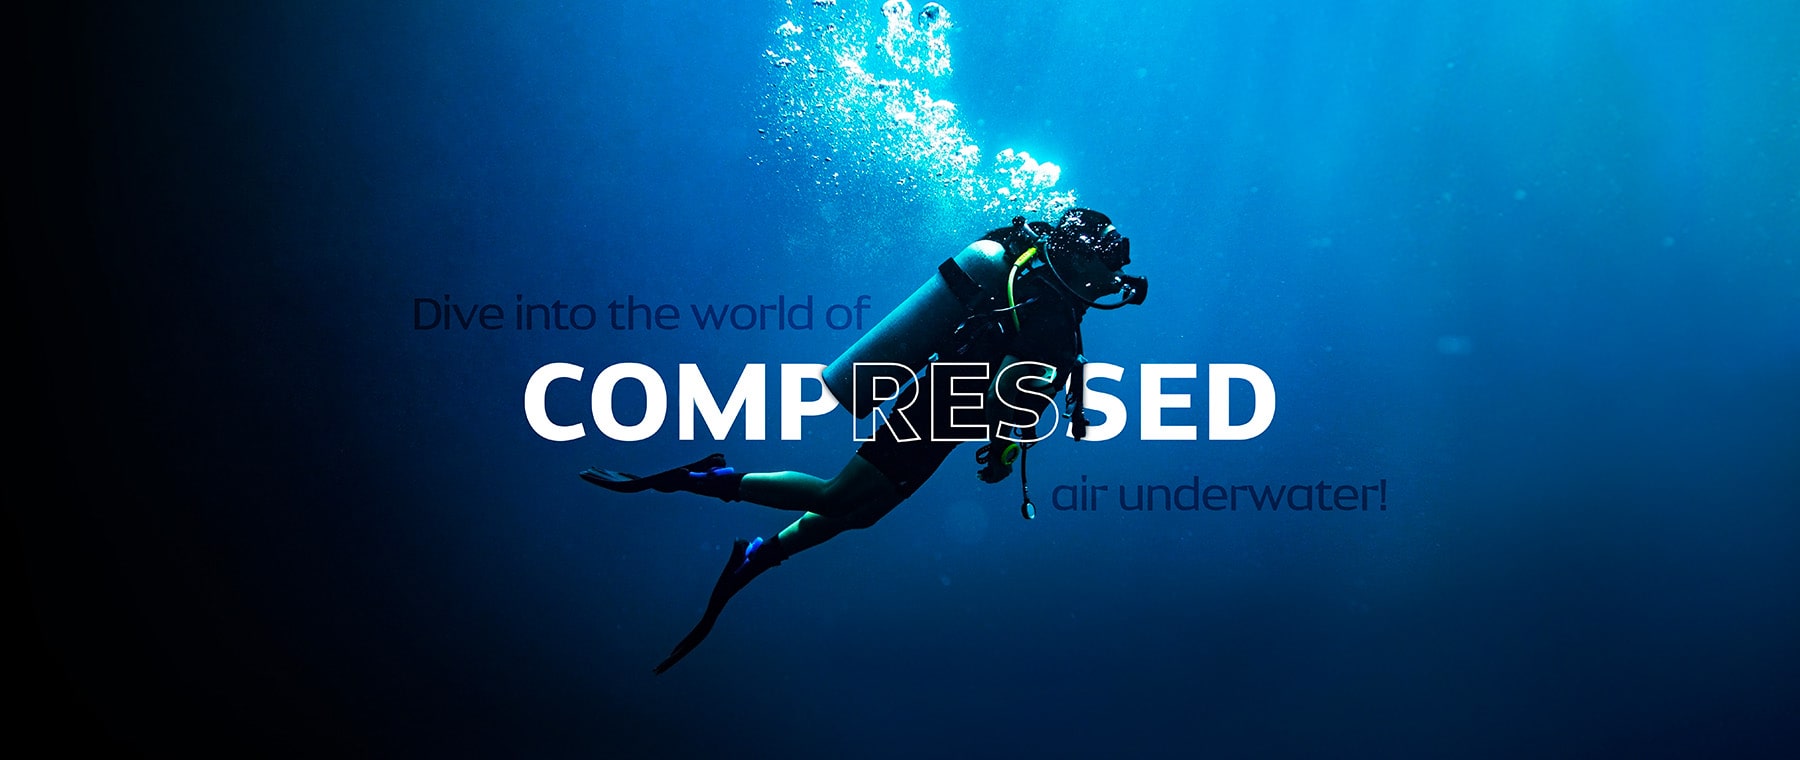 Dive into the world of compressed air underwater!